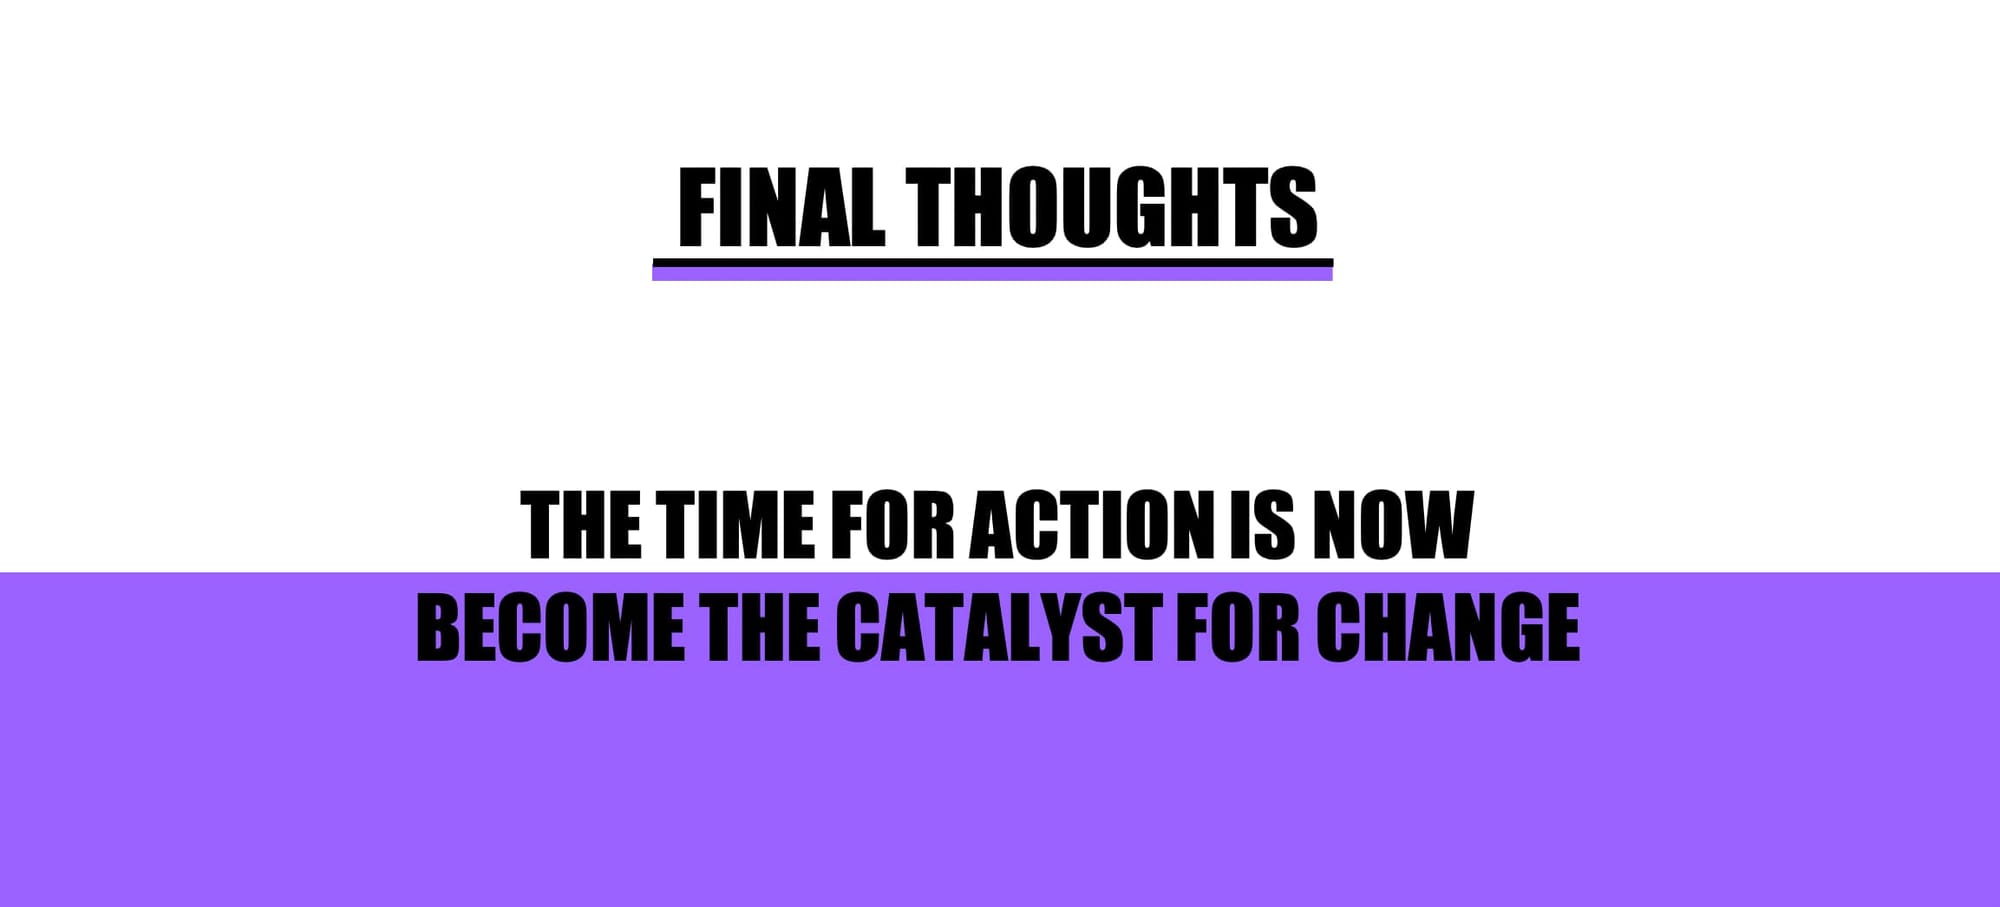 HEADER: FINAL THOUGHTS: THE TIME FOR ACTION IS NOW - BECOME THE CATALYST FOR CHANGE